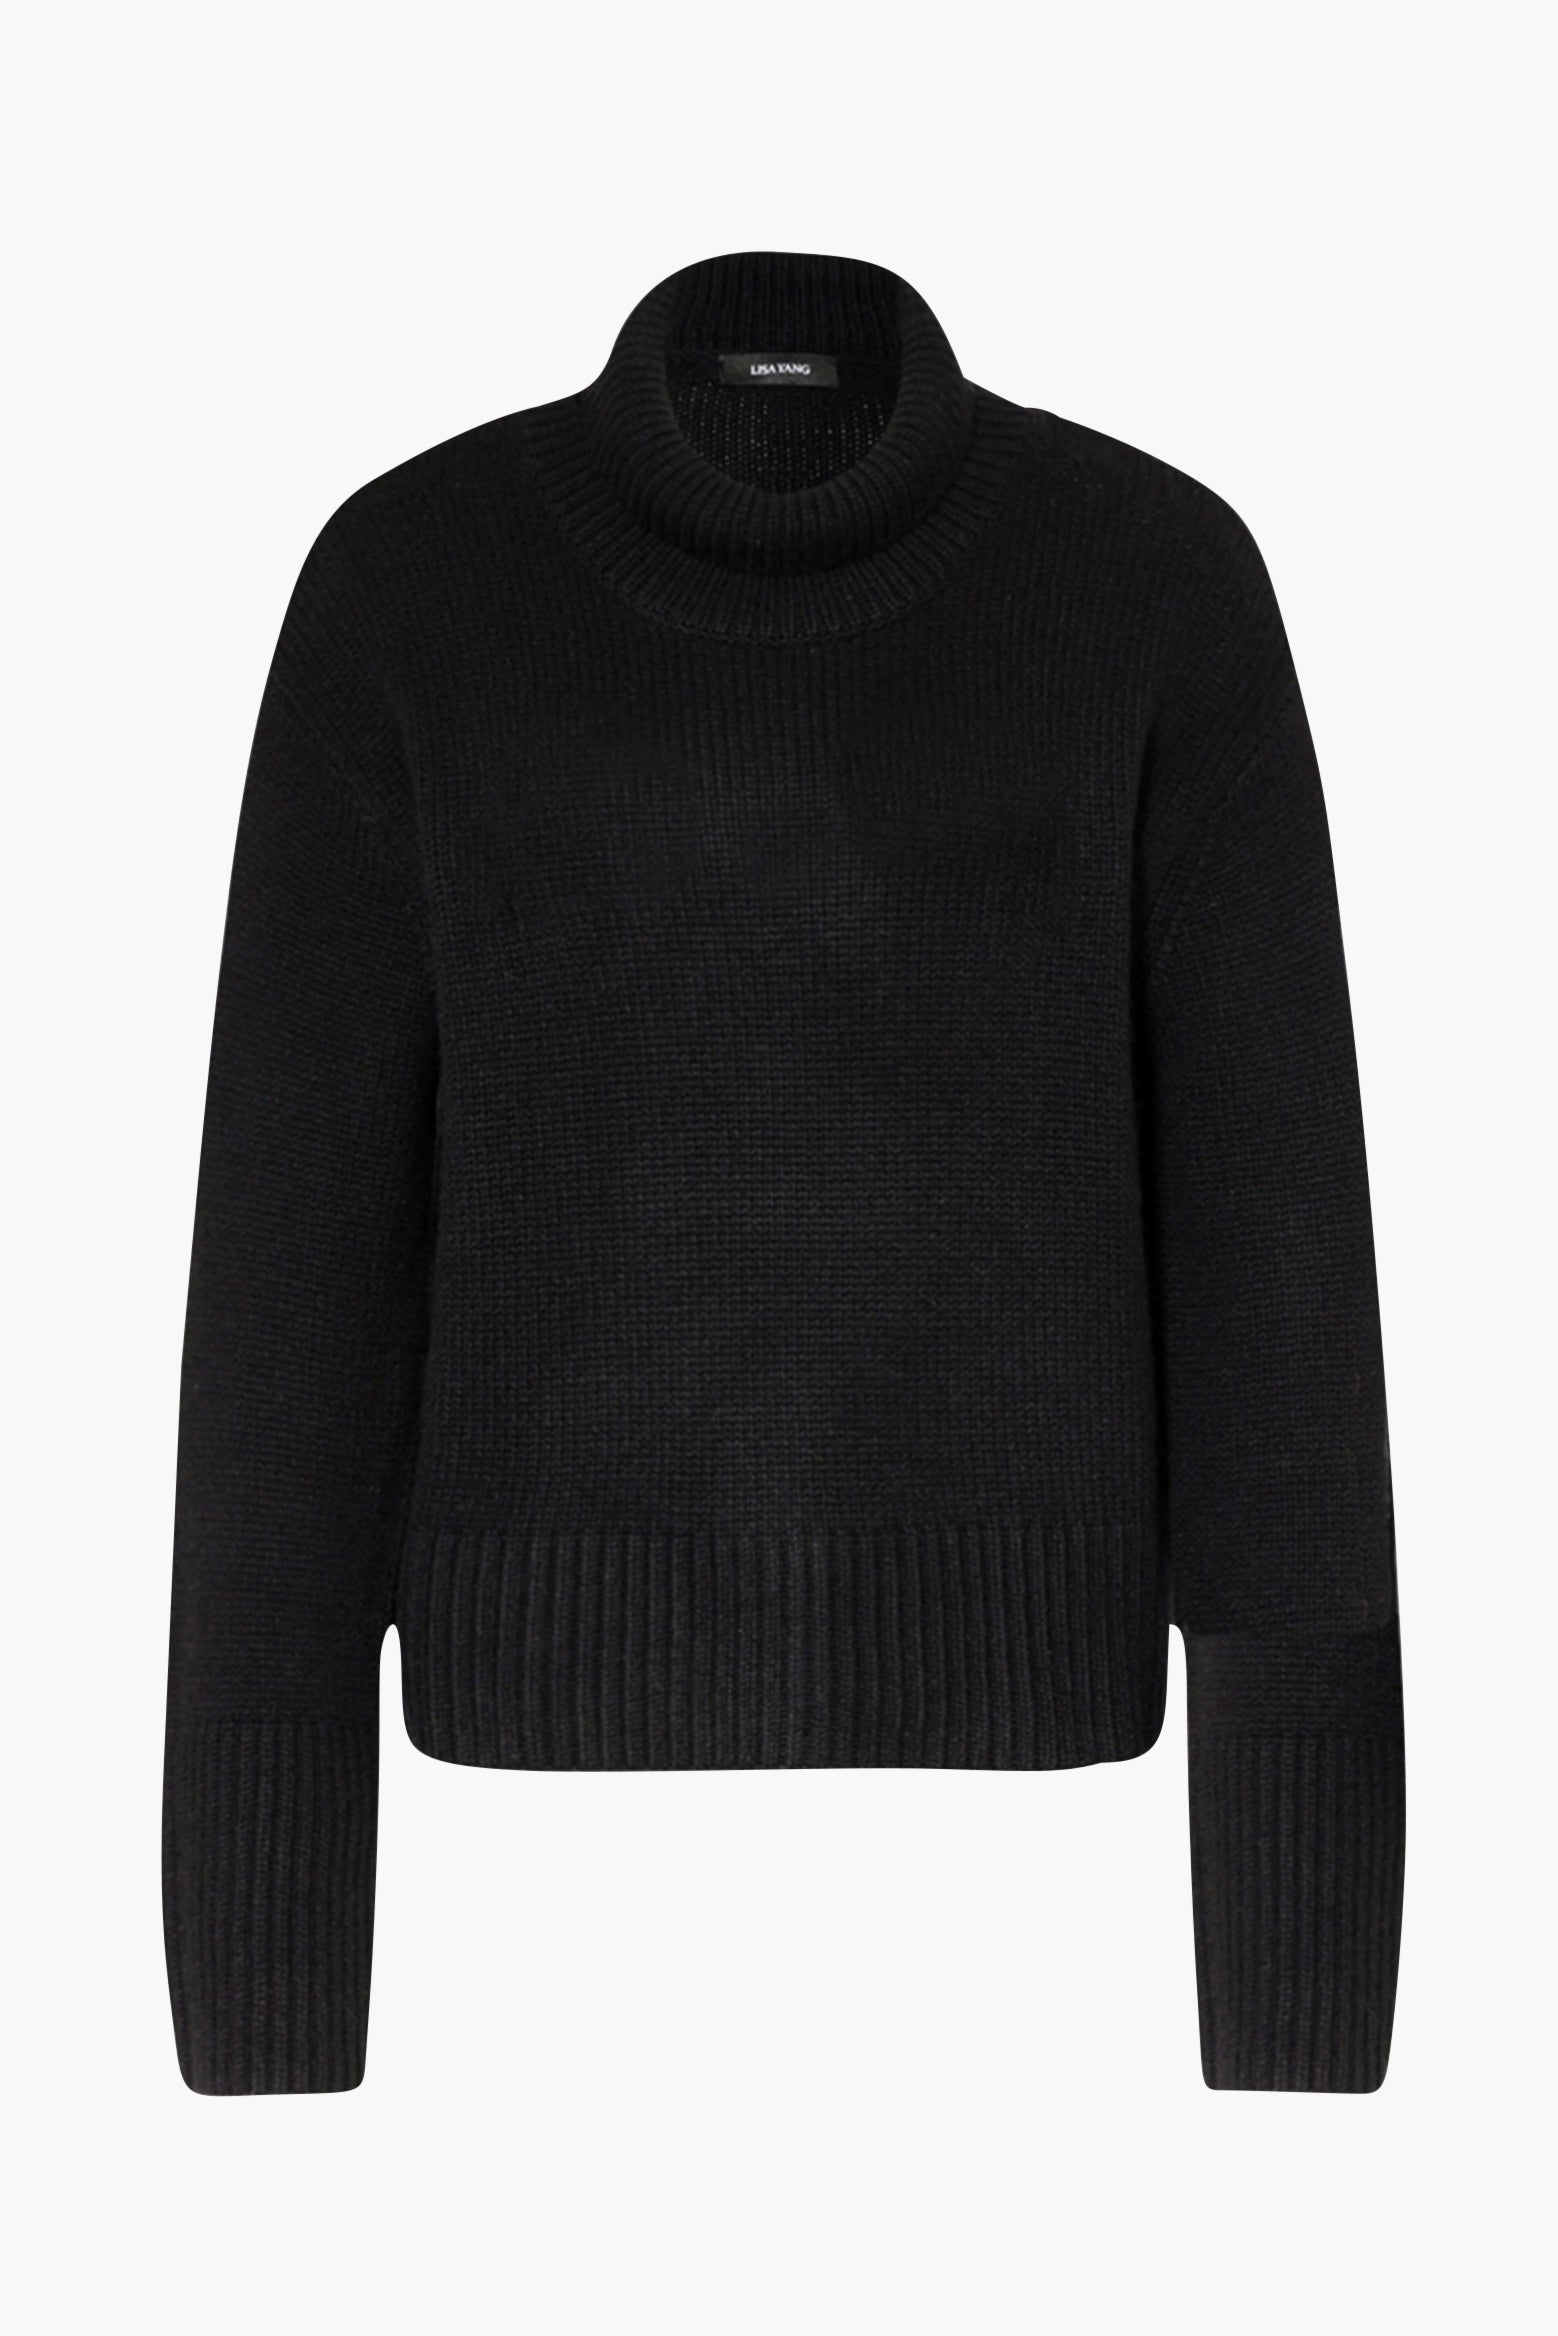 Lisa Yang Fleur Sweater in Black available at TNT The New Trend Australia.